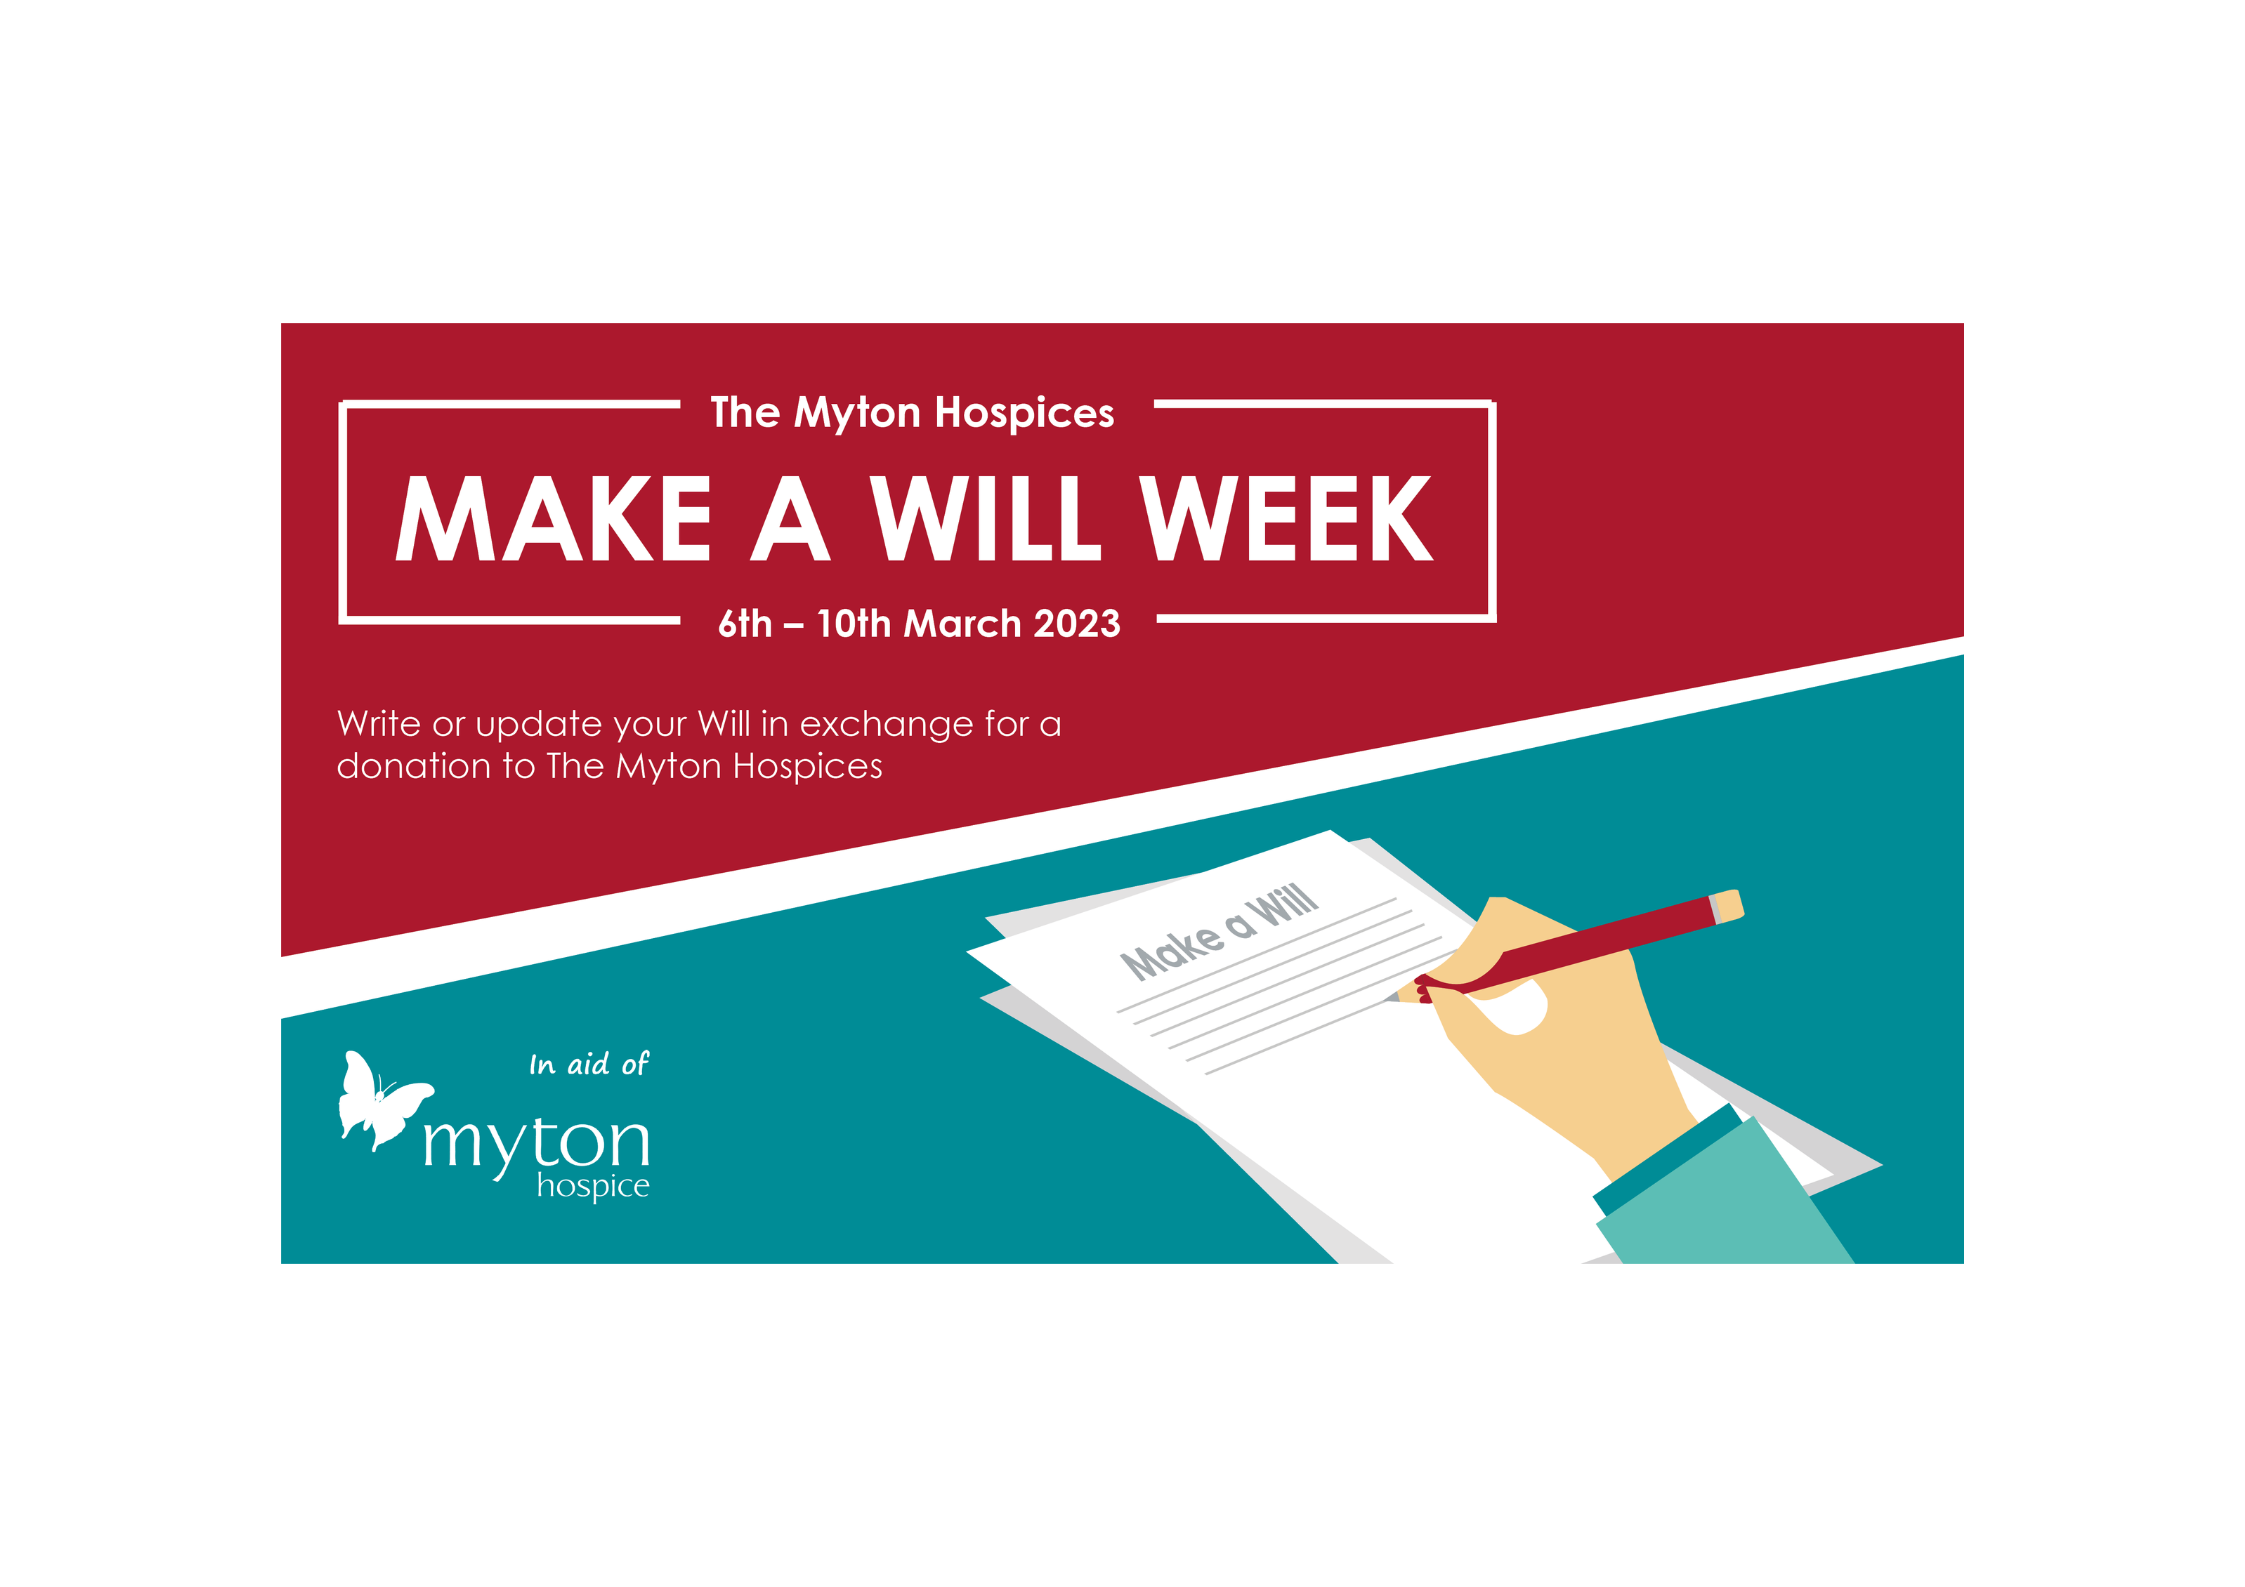 Proud to support Make a Will Week